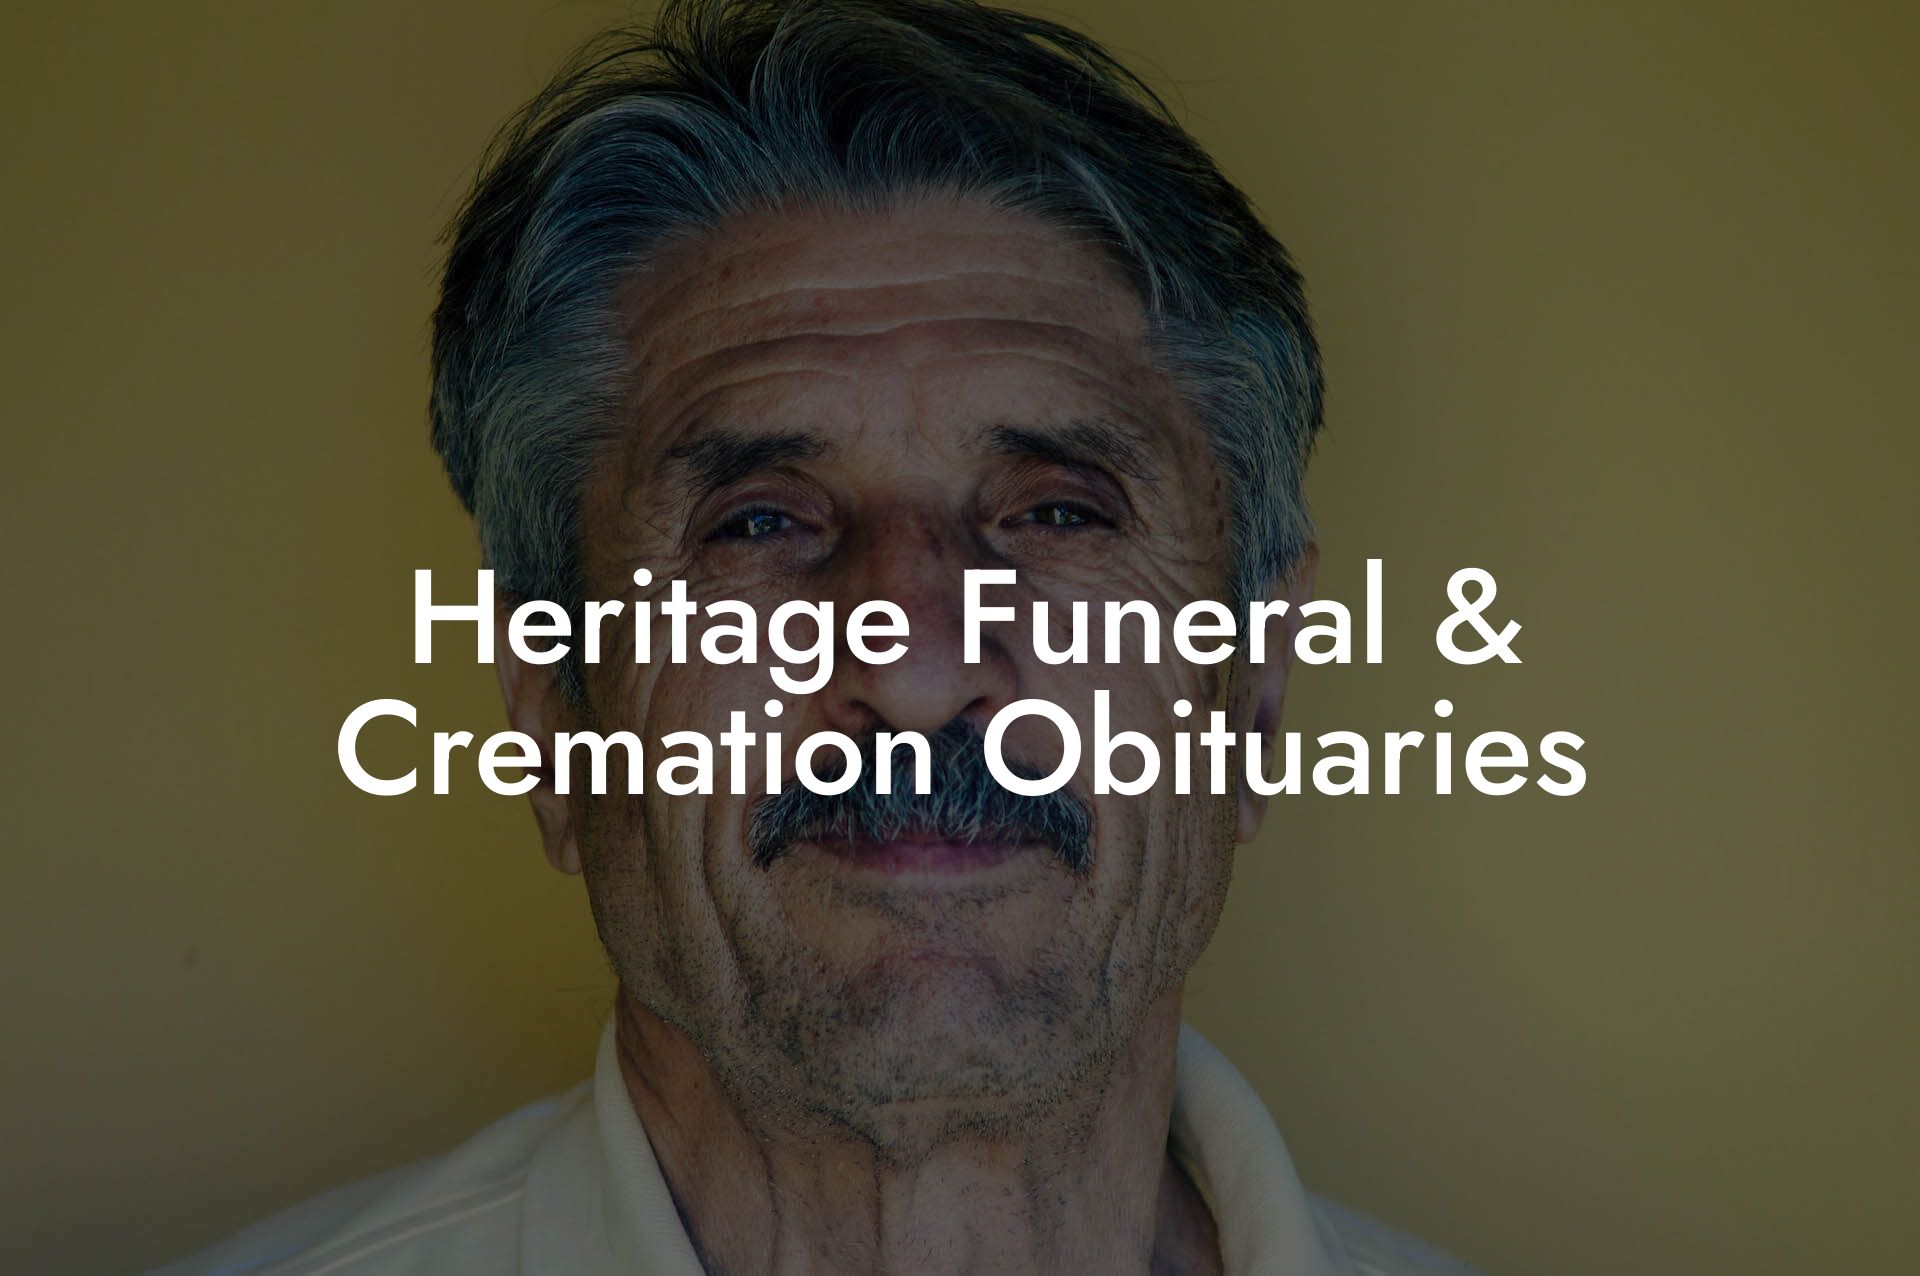 Heritage Funeral & Cremation Obituaries